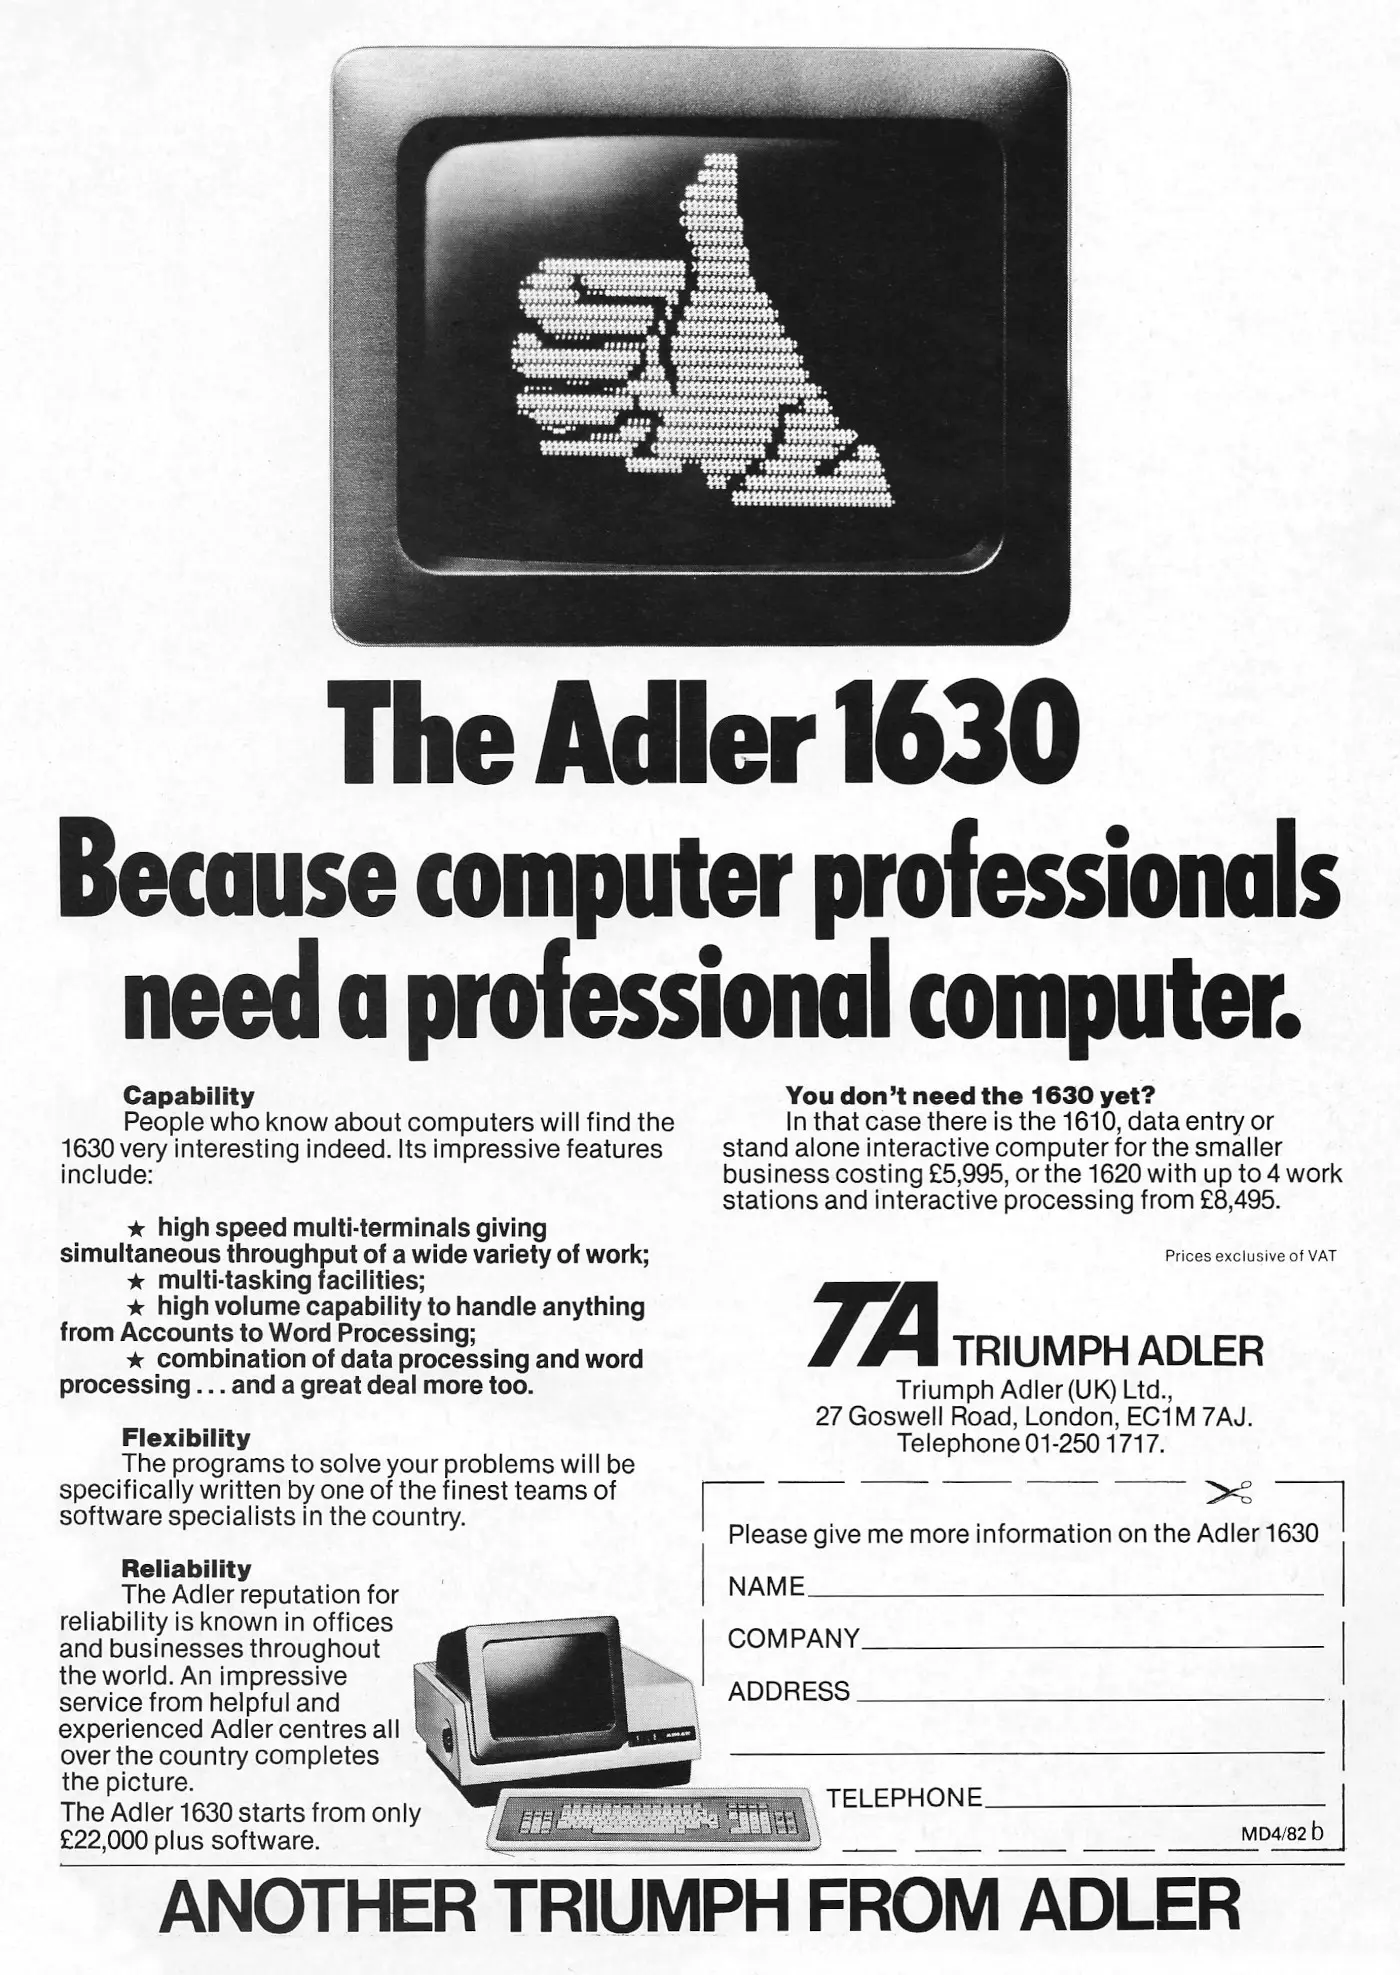 Triumph-Adler Advert: <b>Adler 1630: Because computer professionals need a professional computer</b>, from Micro Decision, May 1982